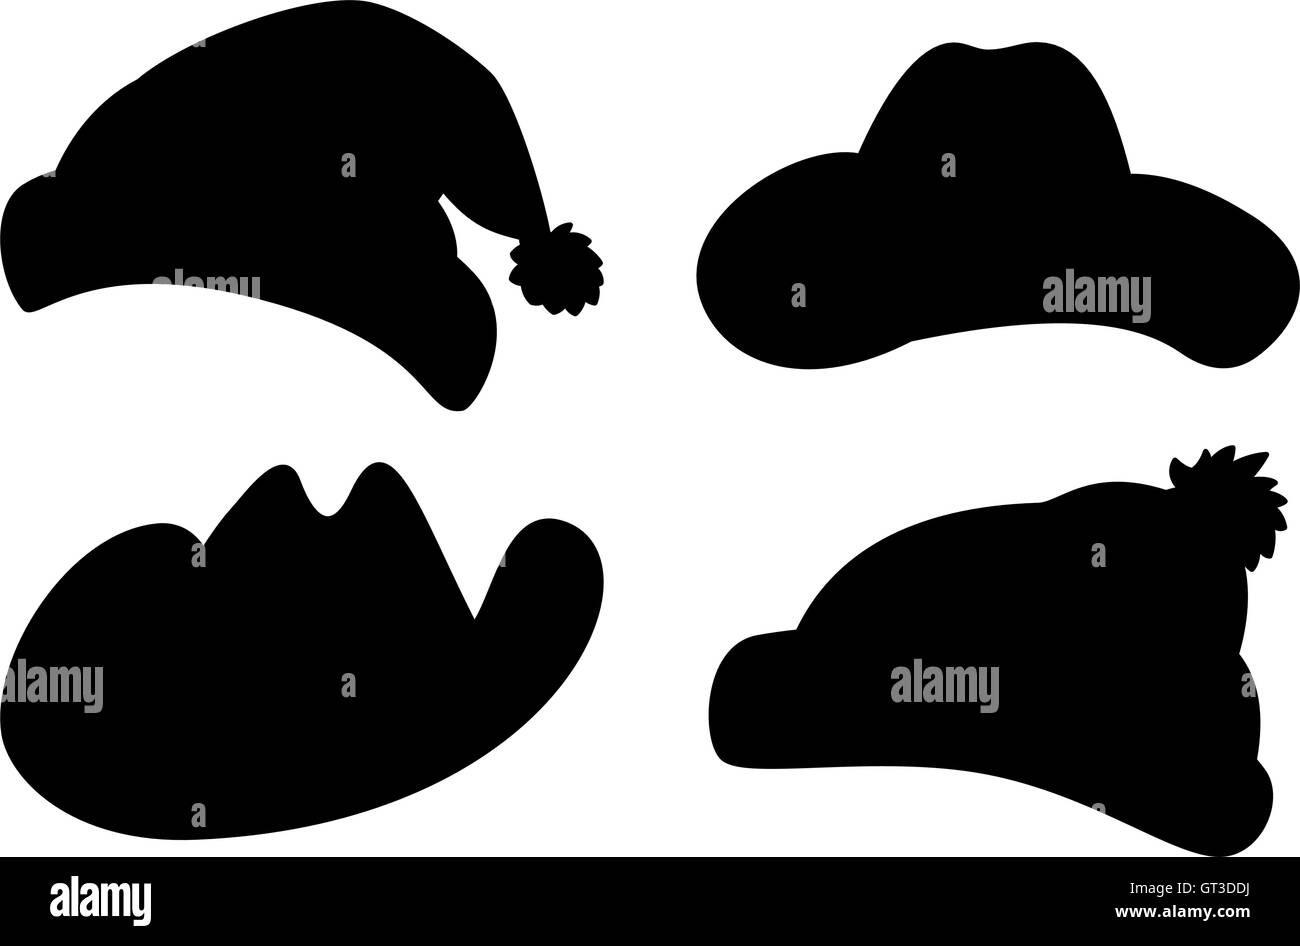 Hats, set silhouettes Stock Vector